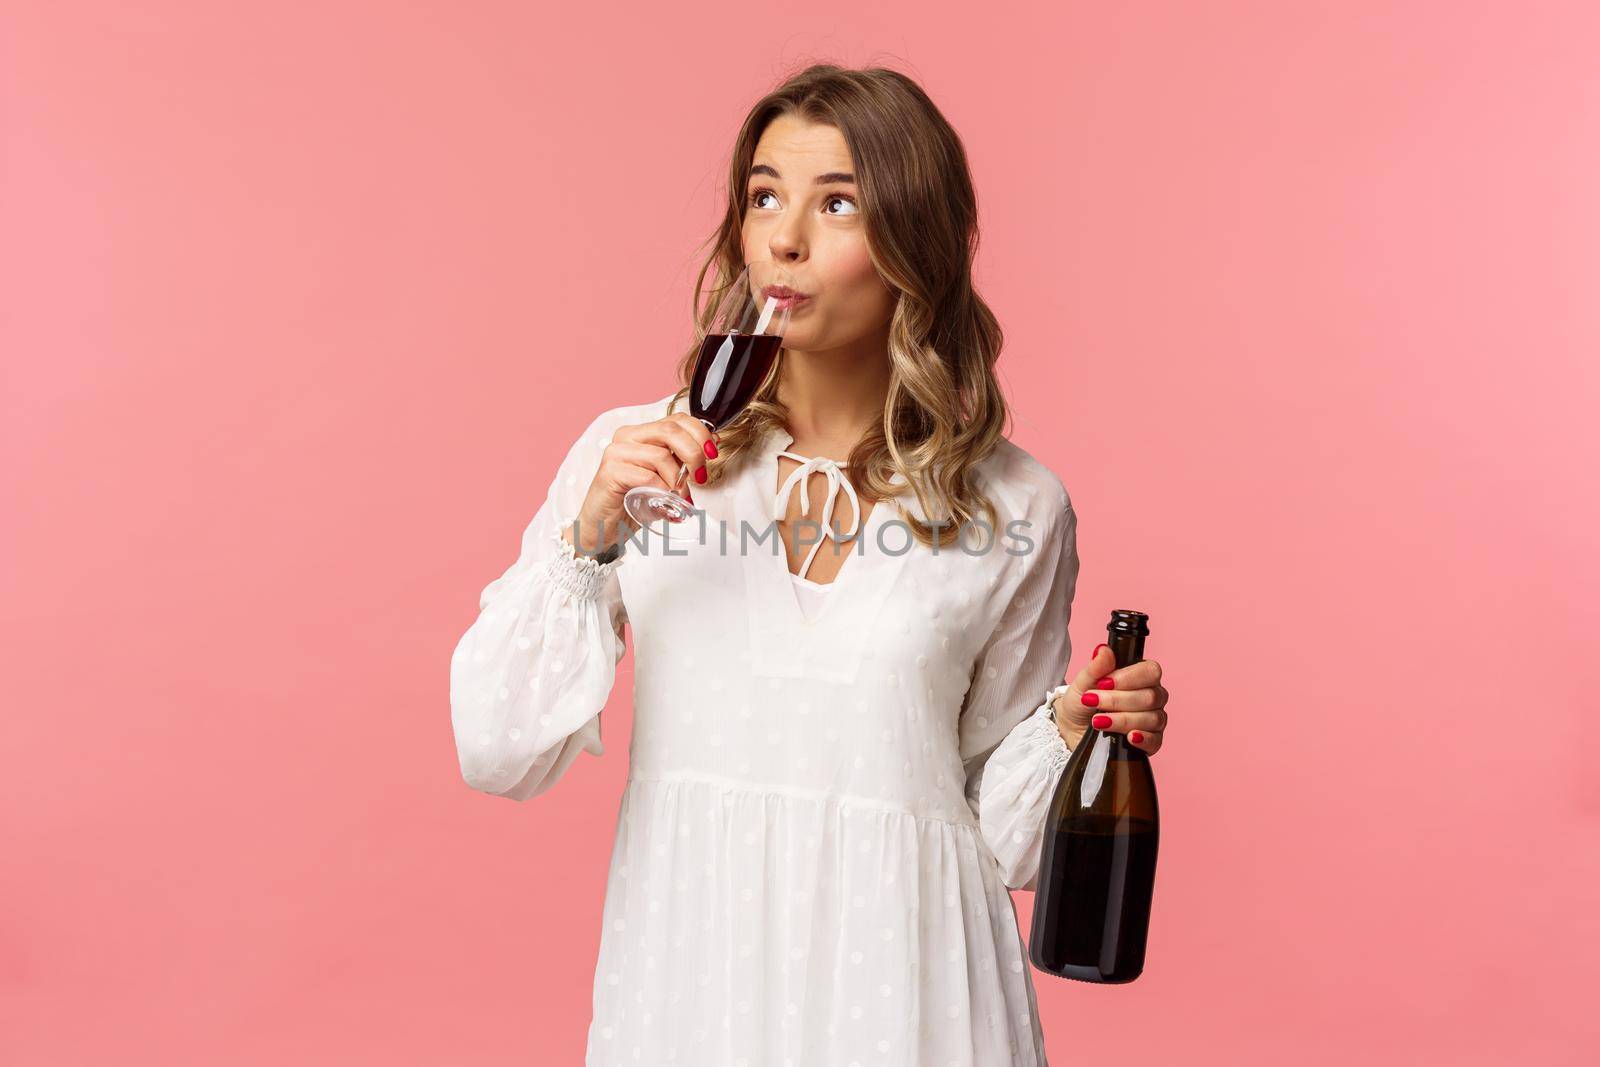 Holidays, spring and party concept. Portrait of carefree independent cute blond woman sipping wine from glass, holding bottle and tasting drink, look up, celebrating with friends, pink background.